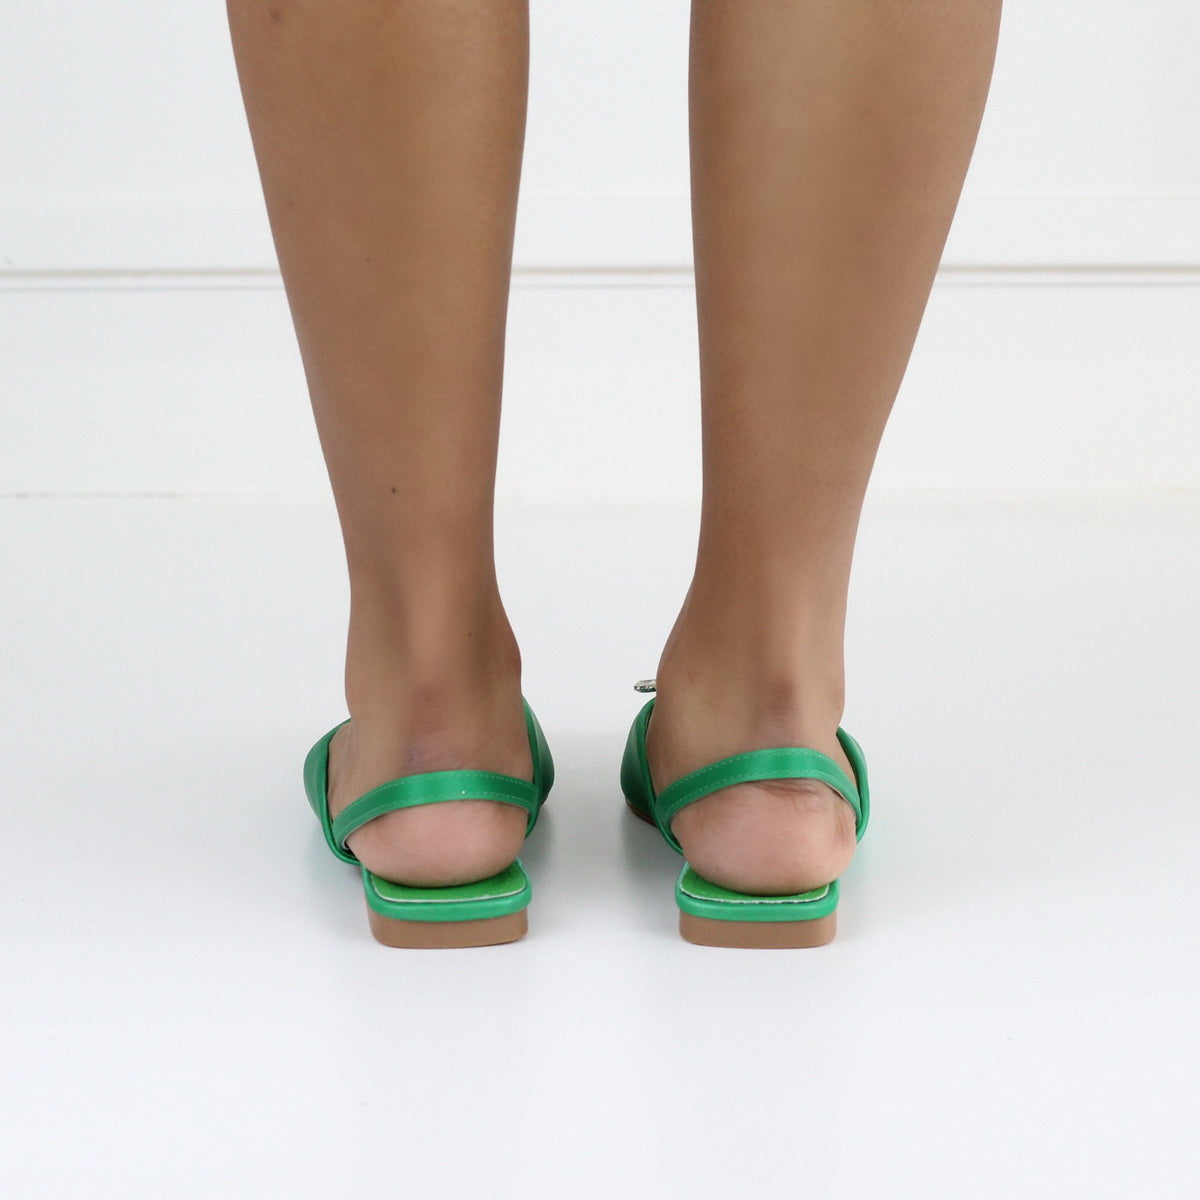 Erina pointy sling back pump with a trim green